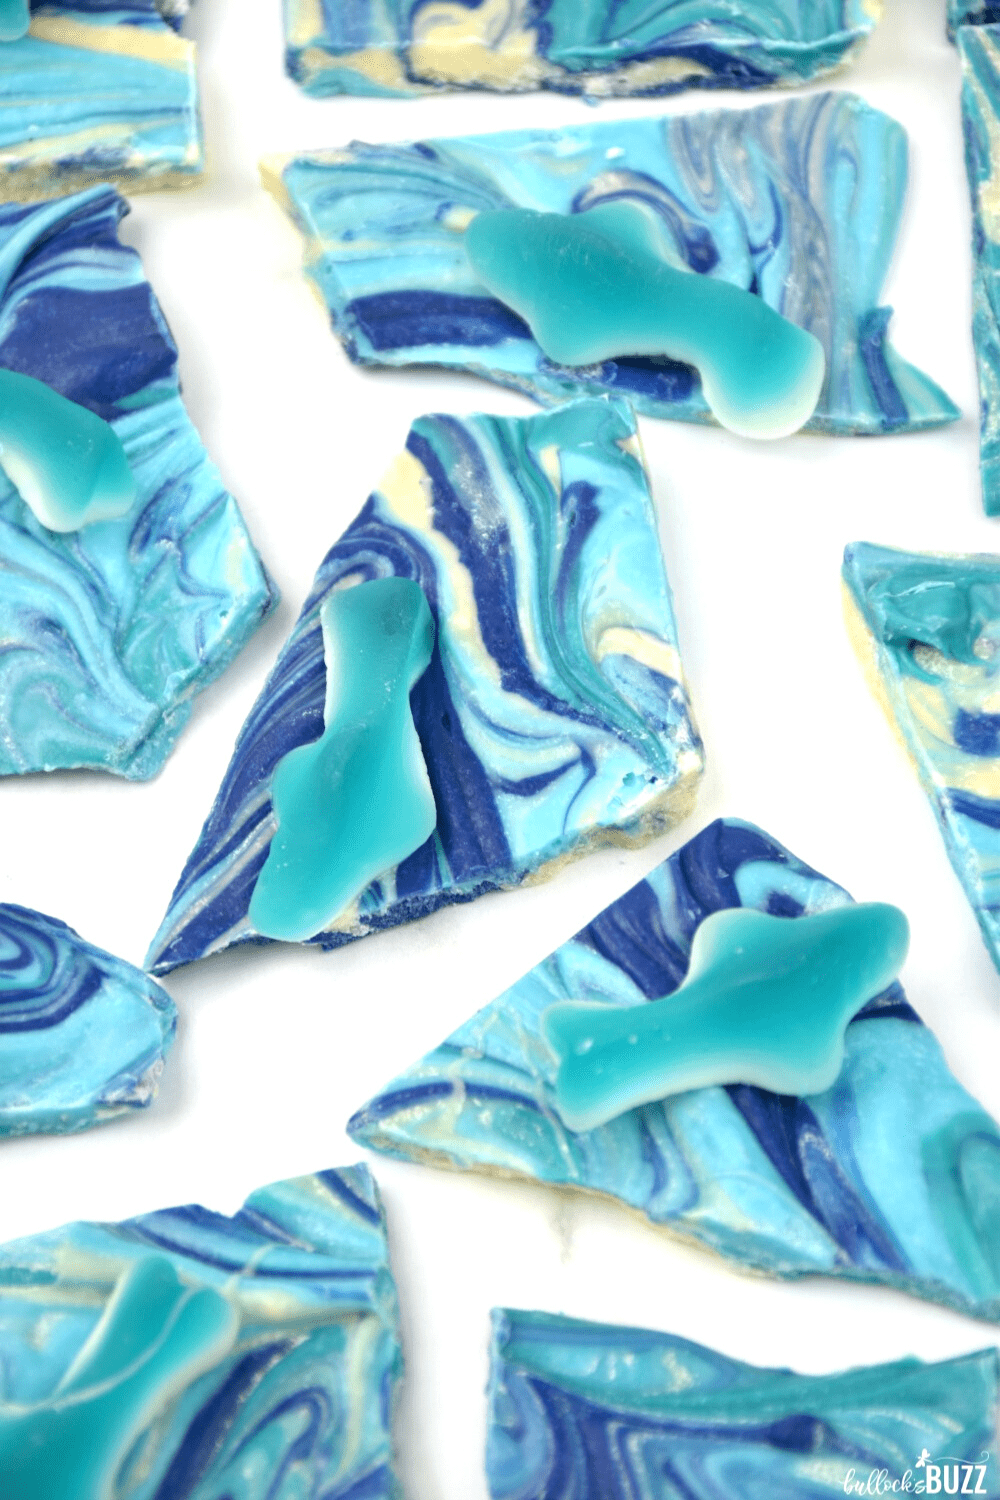 This easy Shark Bark Candy recipe is ideal for an ocean-themed celebration or a Shark Week treat!